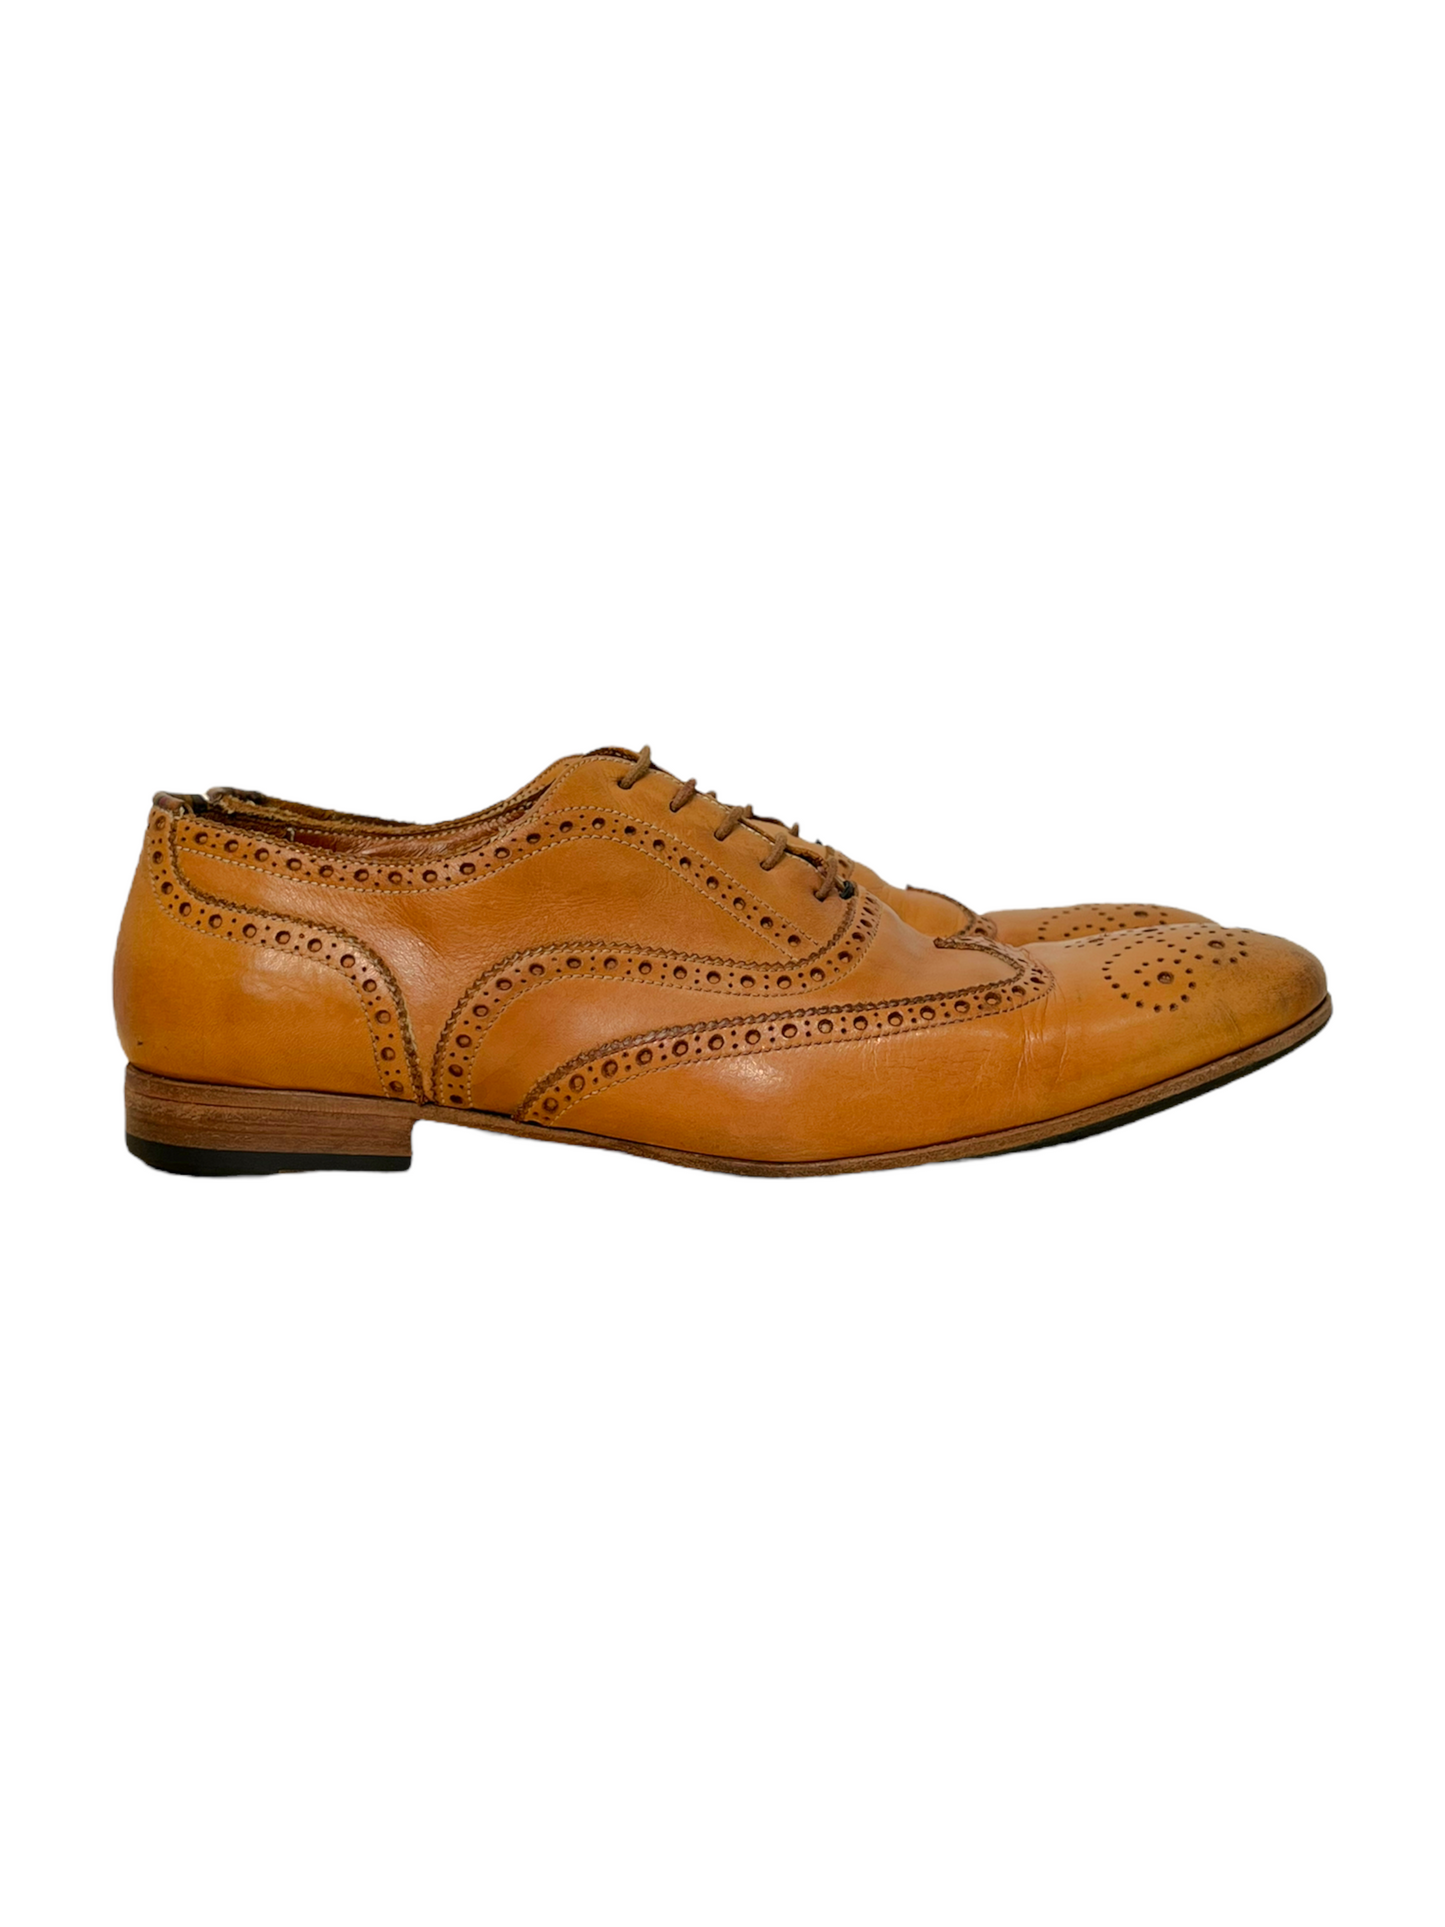 Paul Smith Light Brown Toe Stamped Leather Wingtip Oxford Dress Shoes - Genuine Design Luxury Consignment for Men. New & Pre-Owned Clothing, Shoes, & Accessories. Calgary, Canada